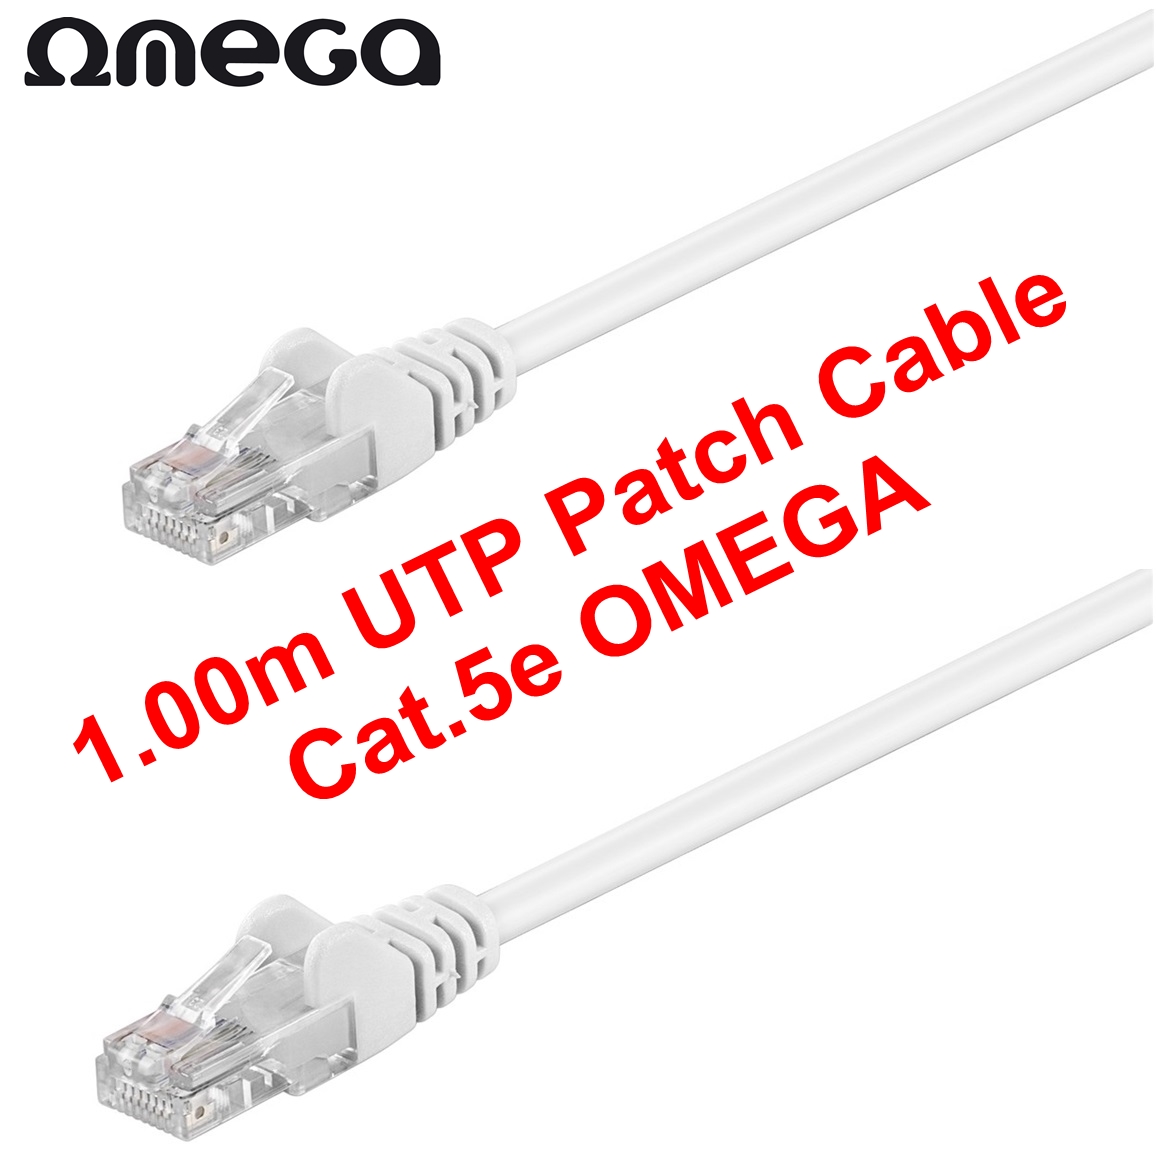 1.00m UTP Patch Cable Cat.5e OMEGA (GREY)